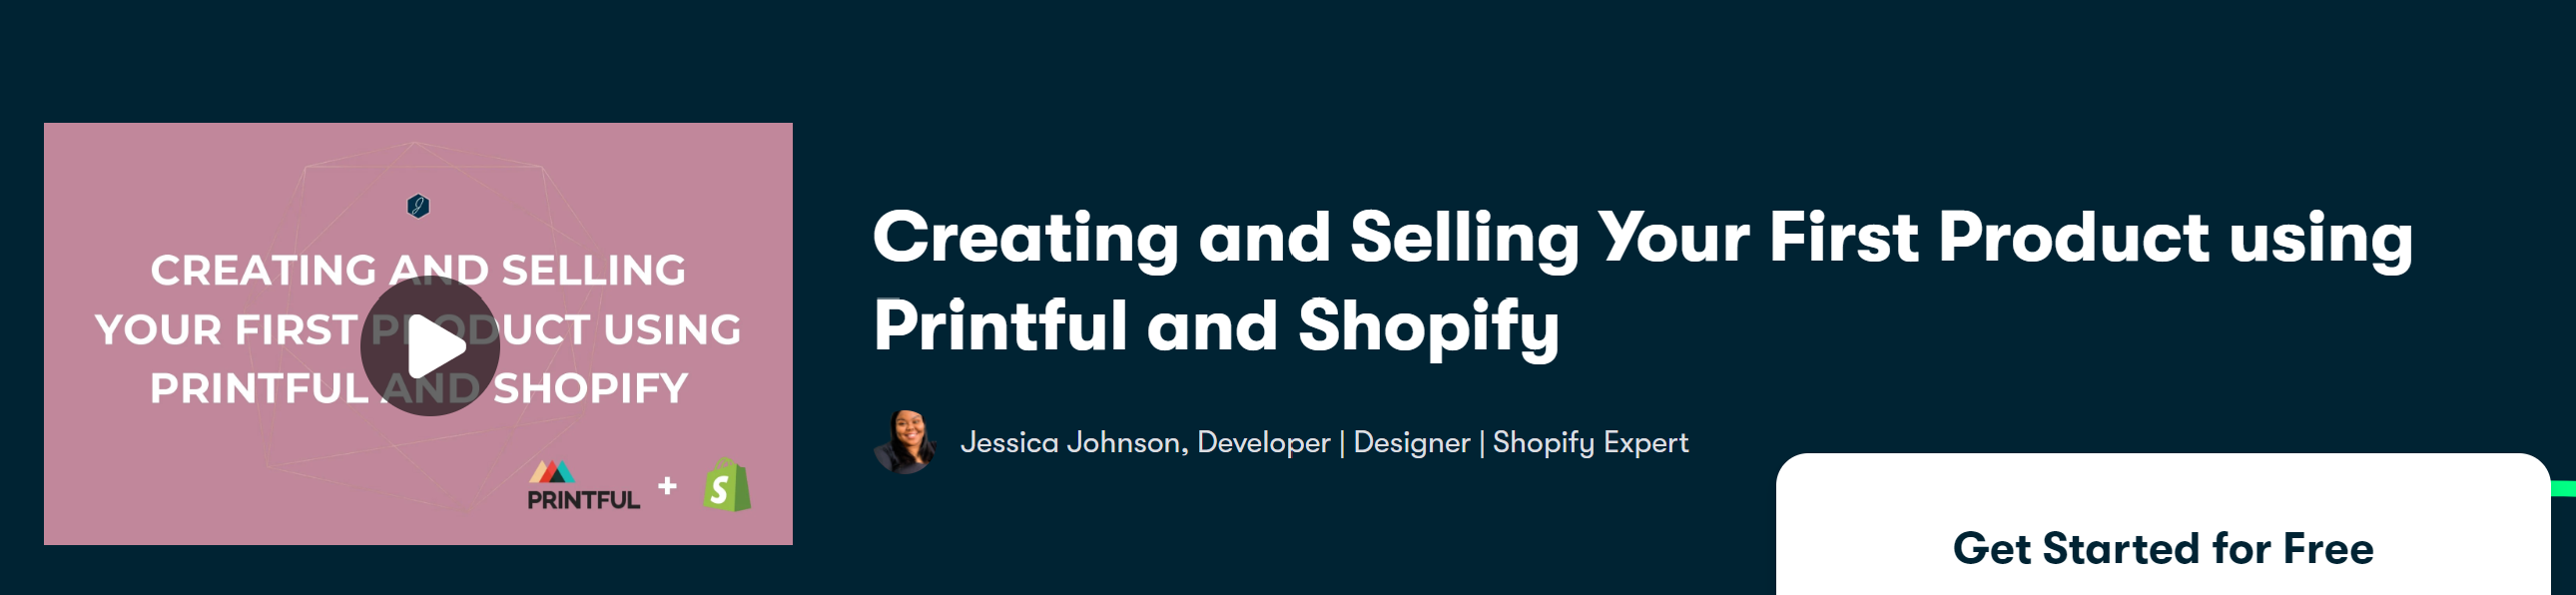 Creating and Selling Your First Product using Printful and Shopify